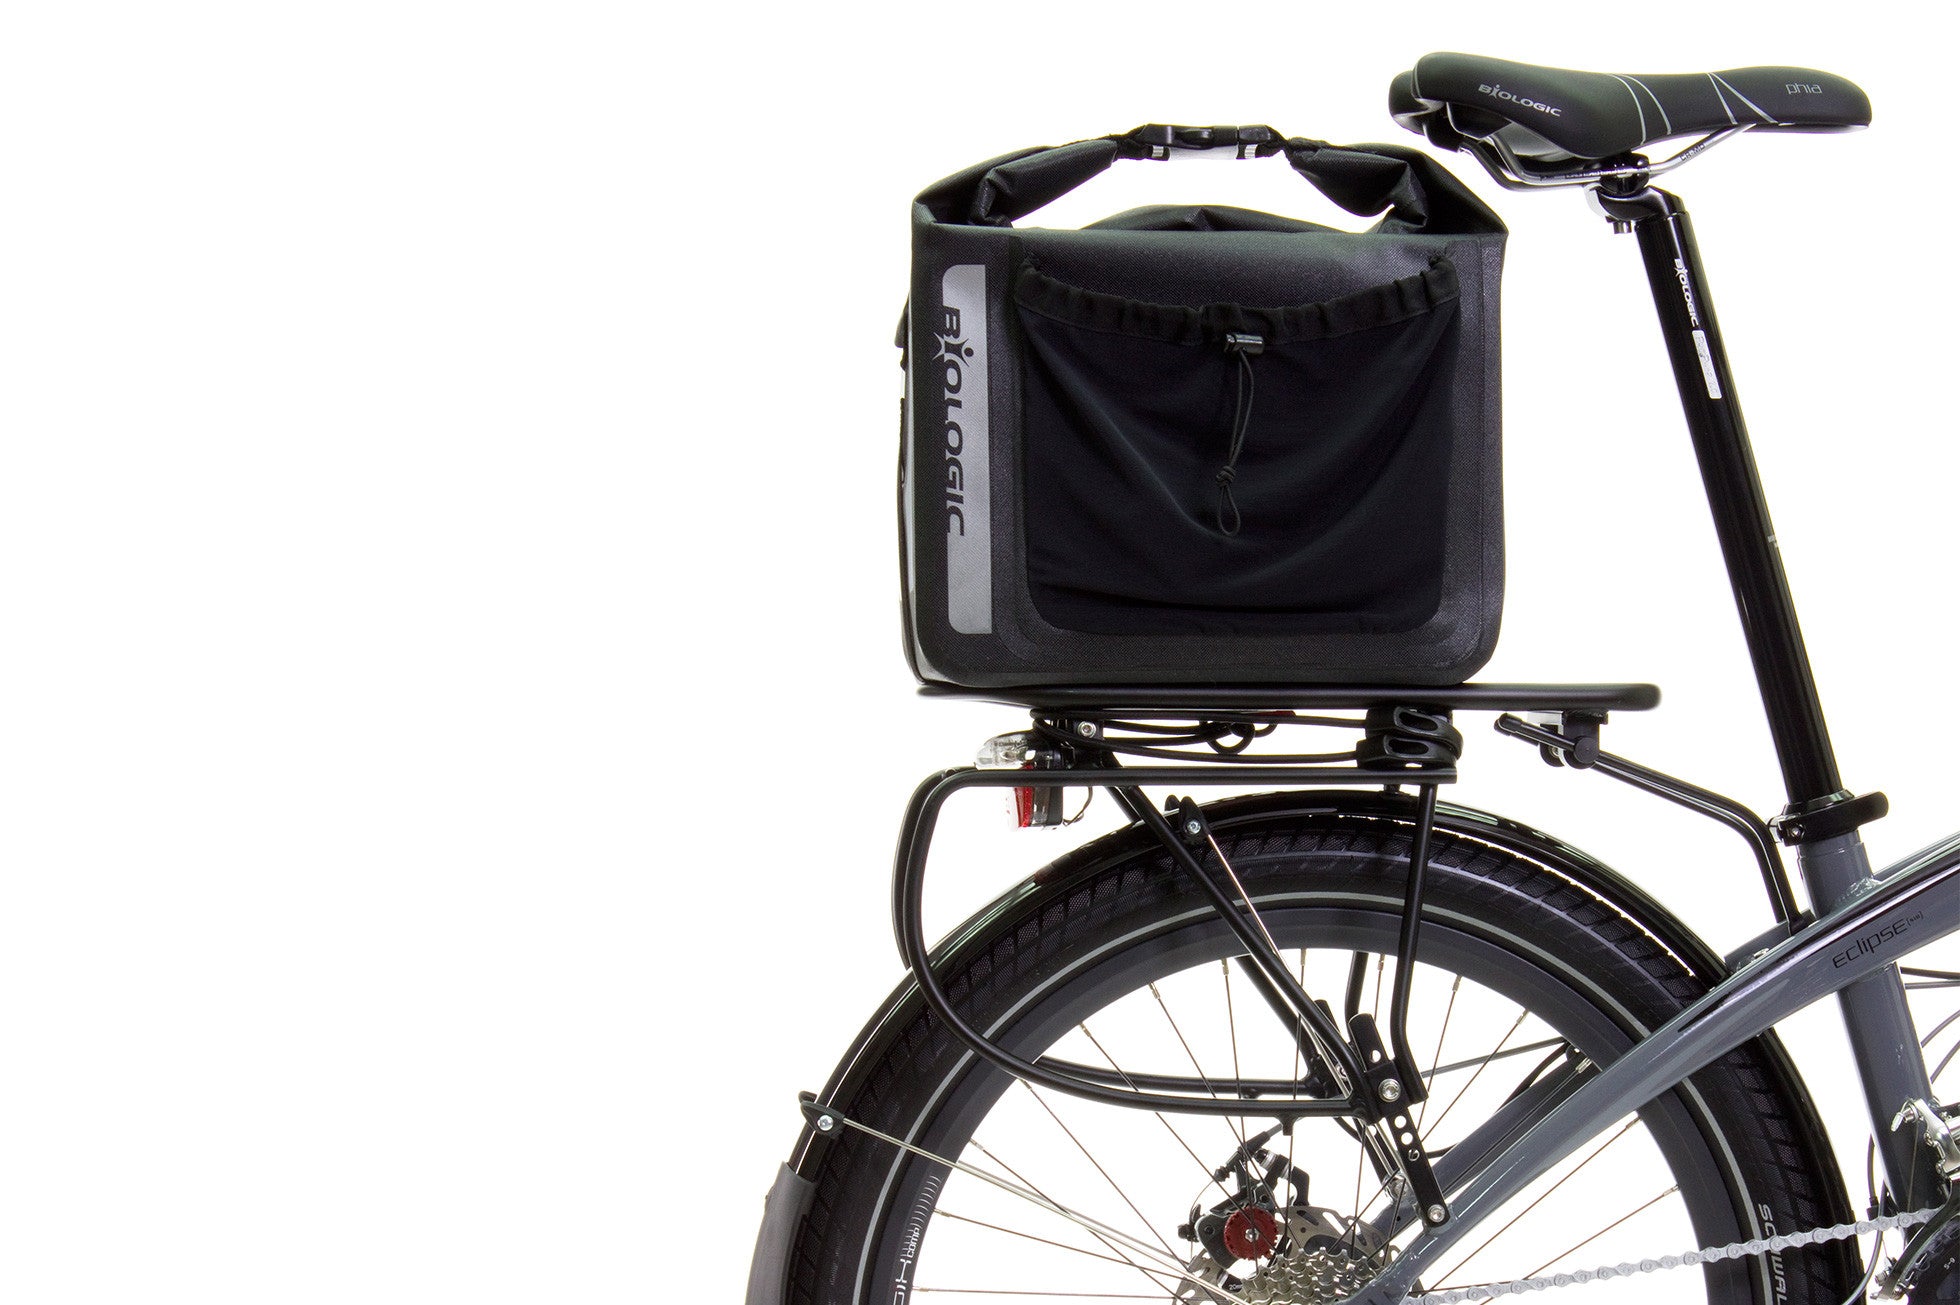 Mount trunk bags or baskets to top deck, and panniers on lower rails